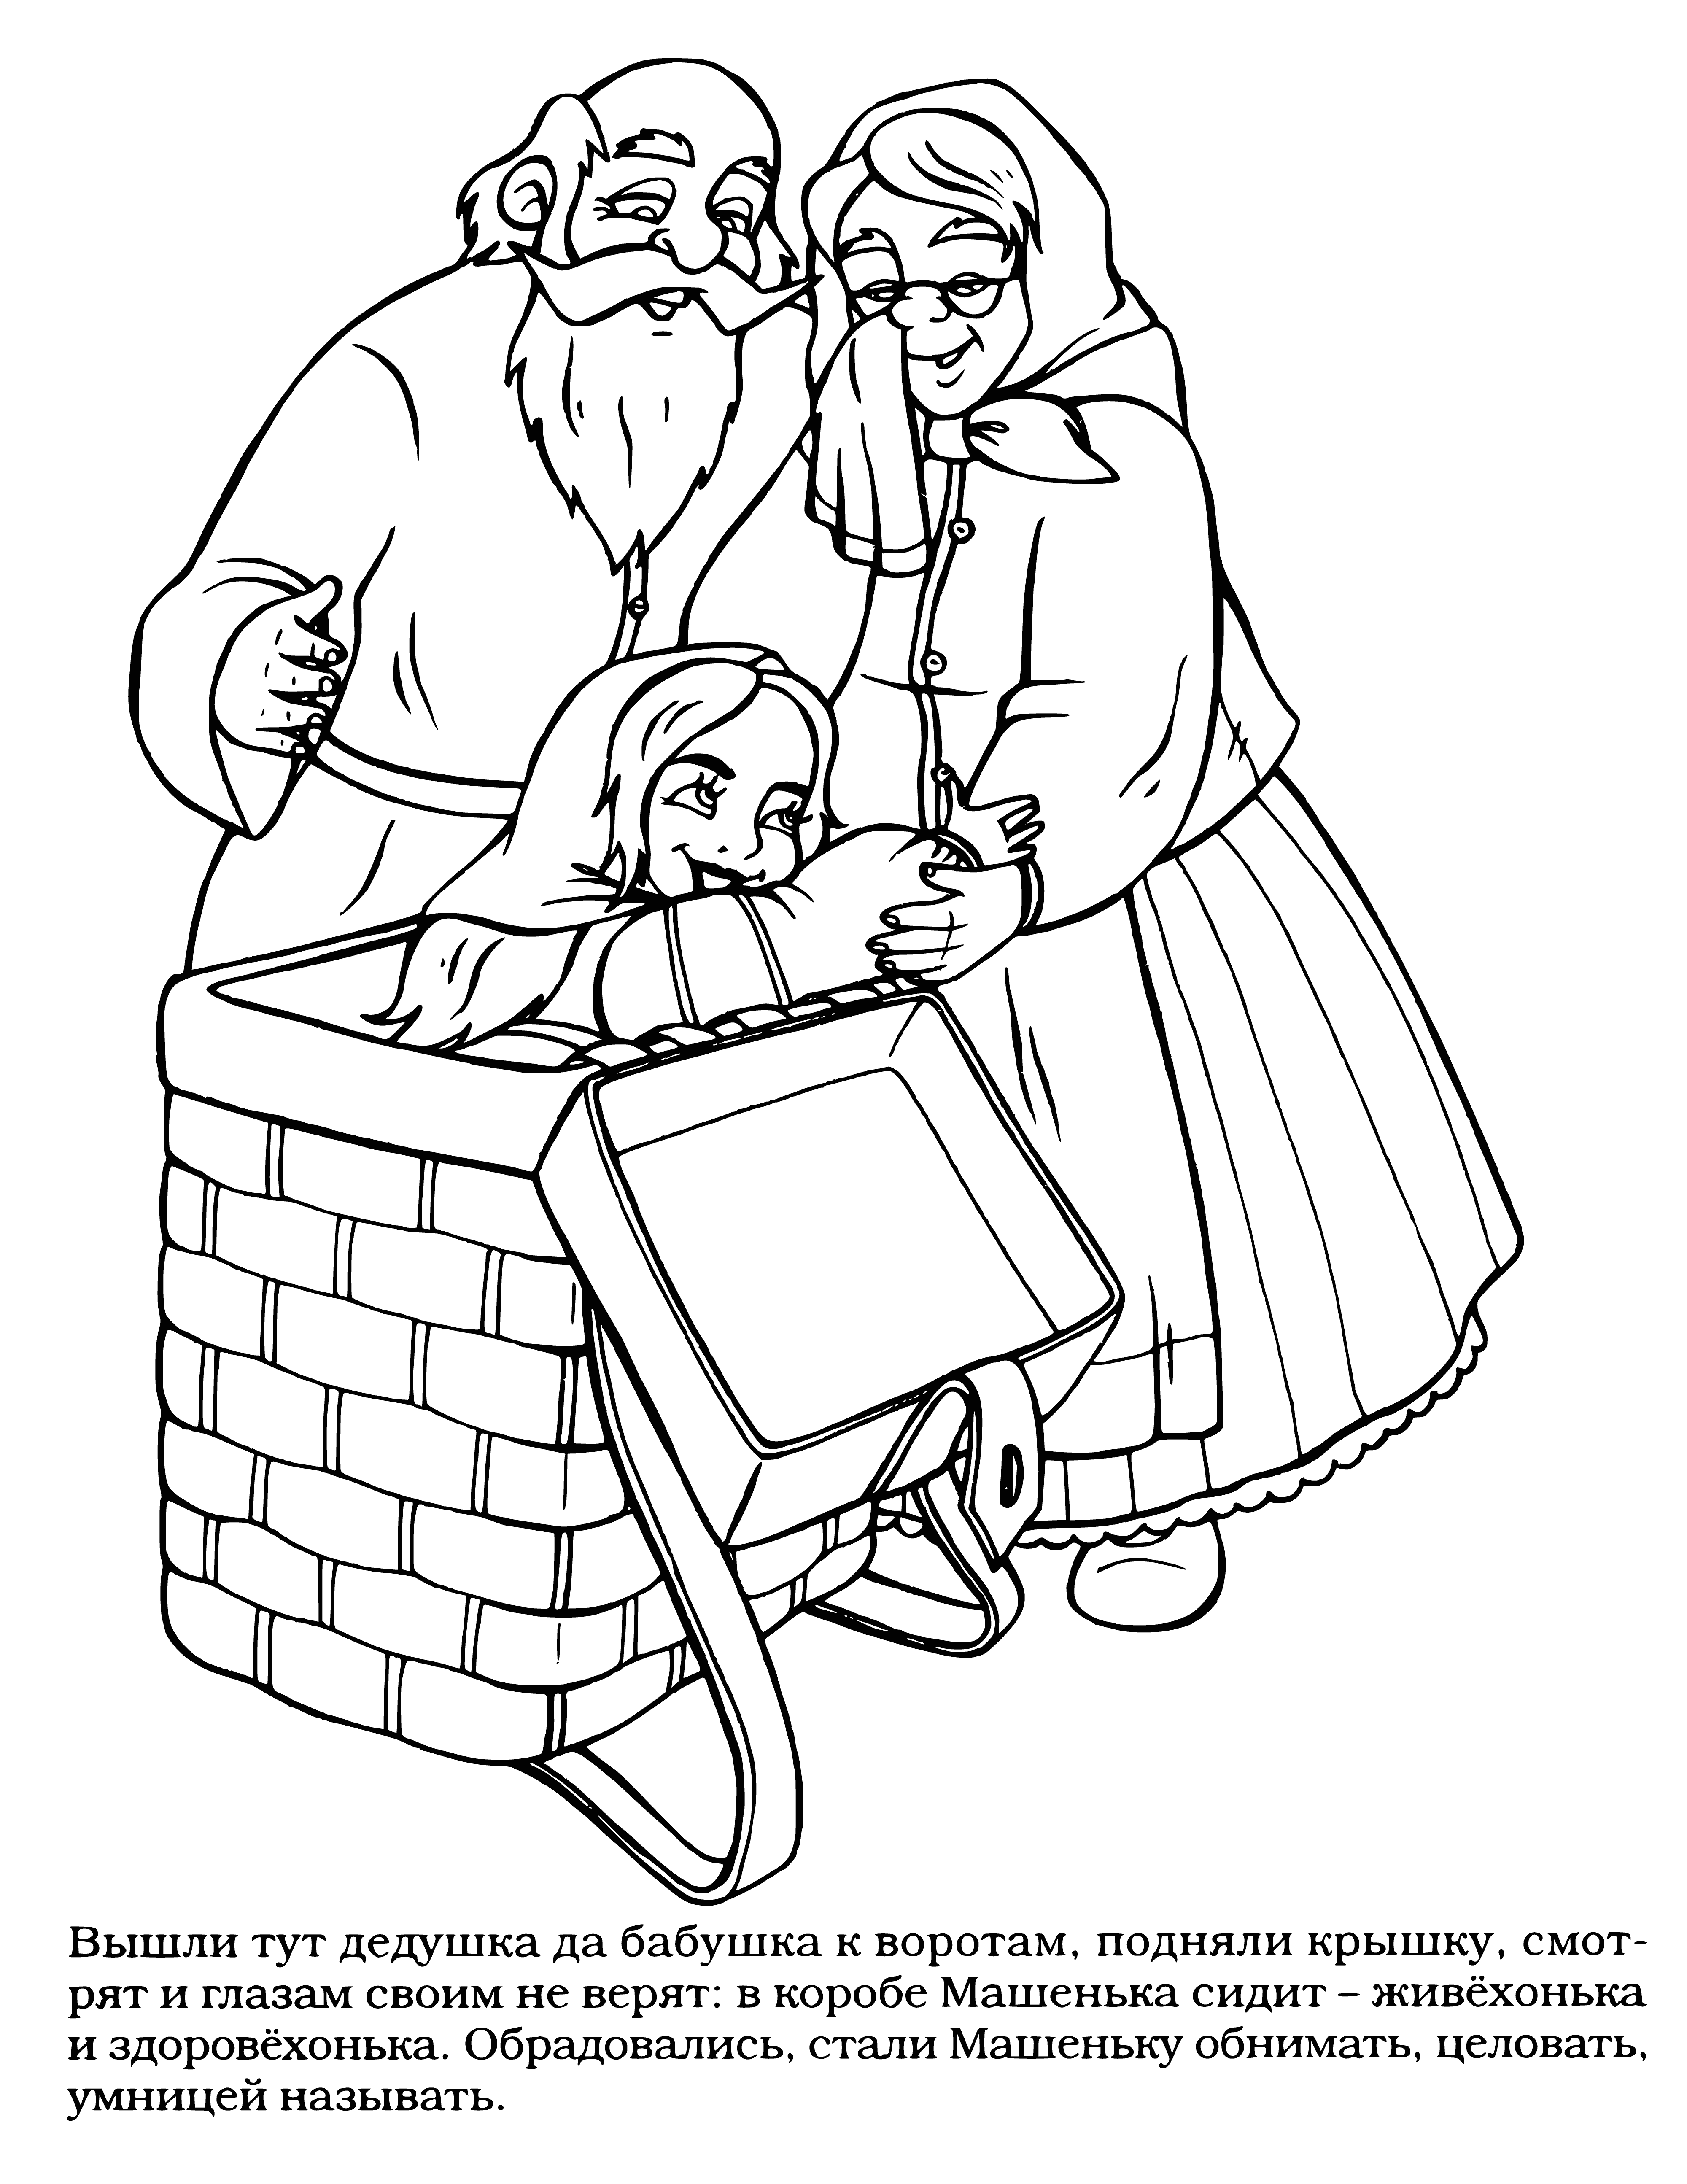 coloring page: Group laughs at woman lying in snow w/ broken broom; one child holds snowball. #humor